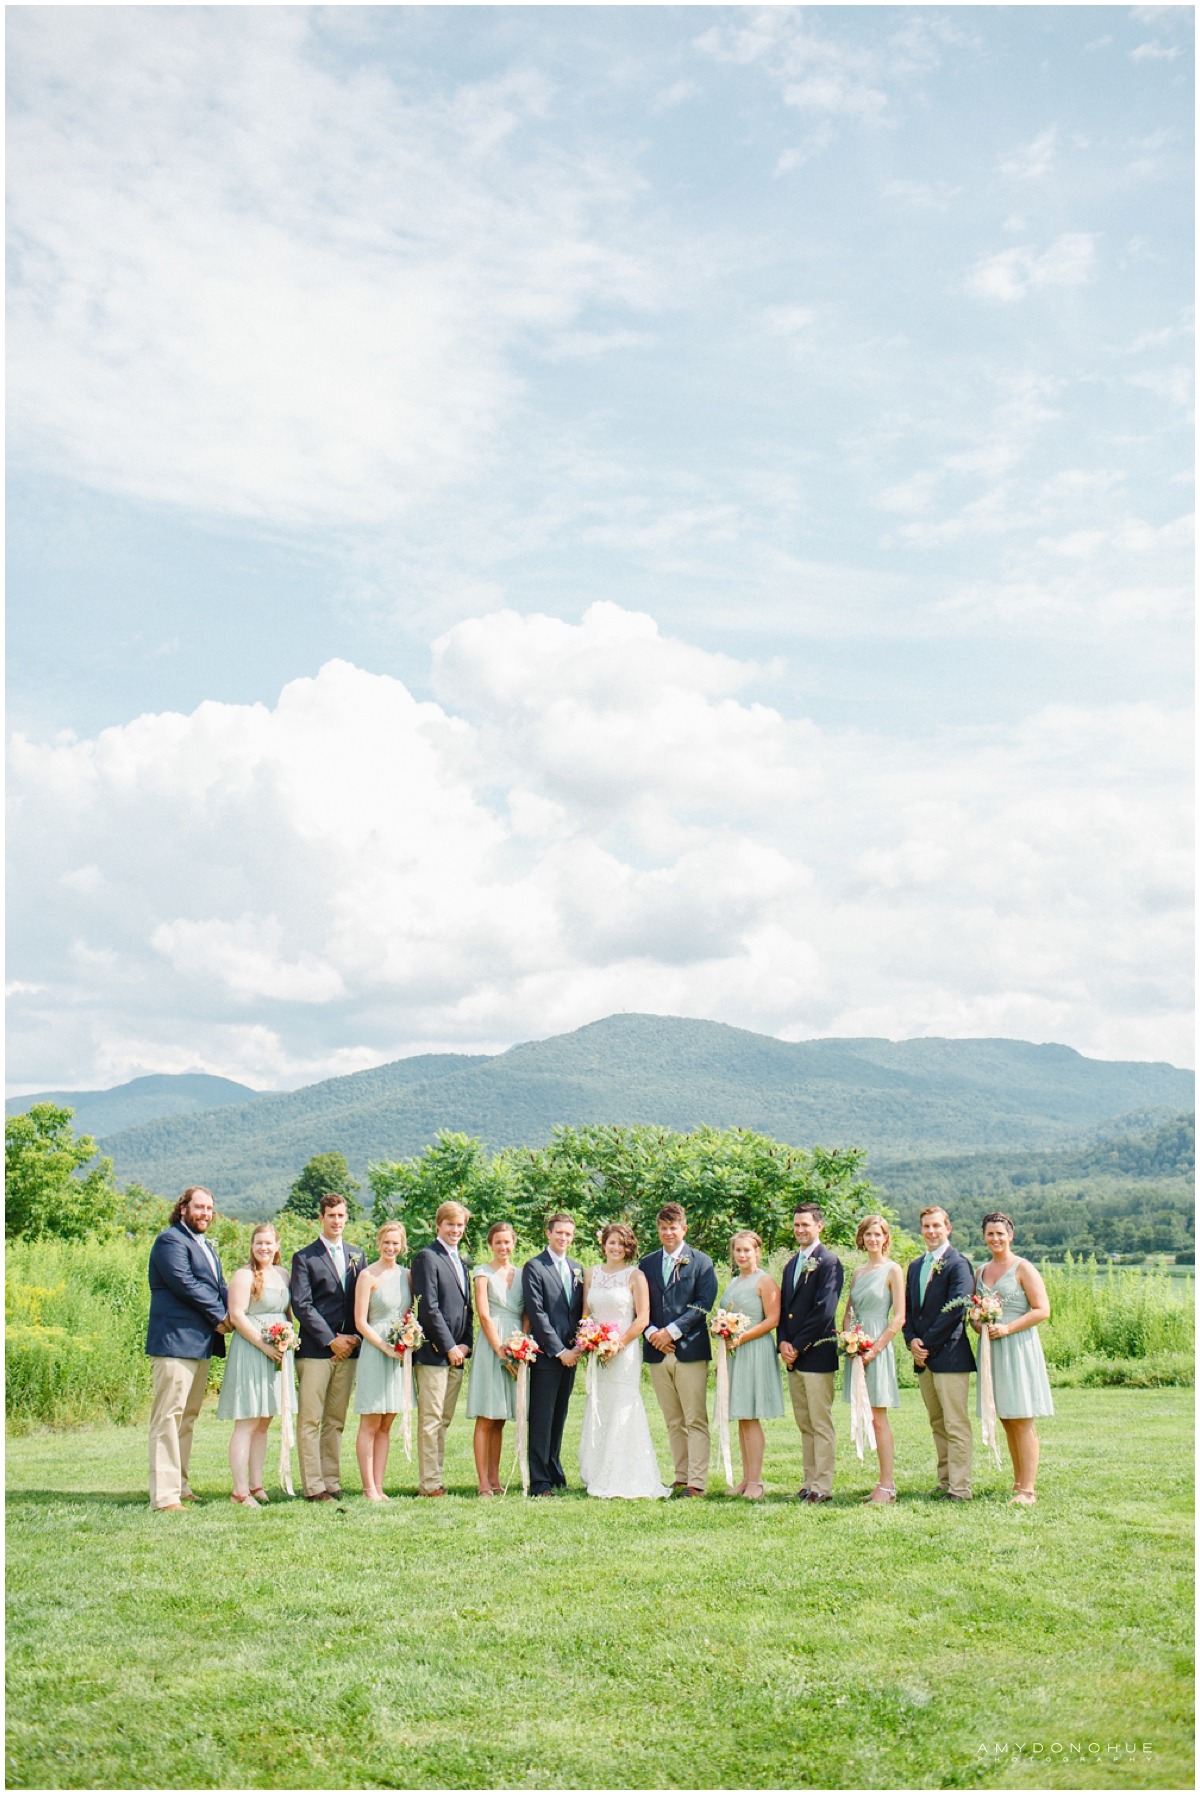 West Monitor Barn | Vermont | Amy Donohue Photography